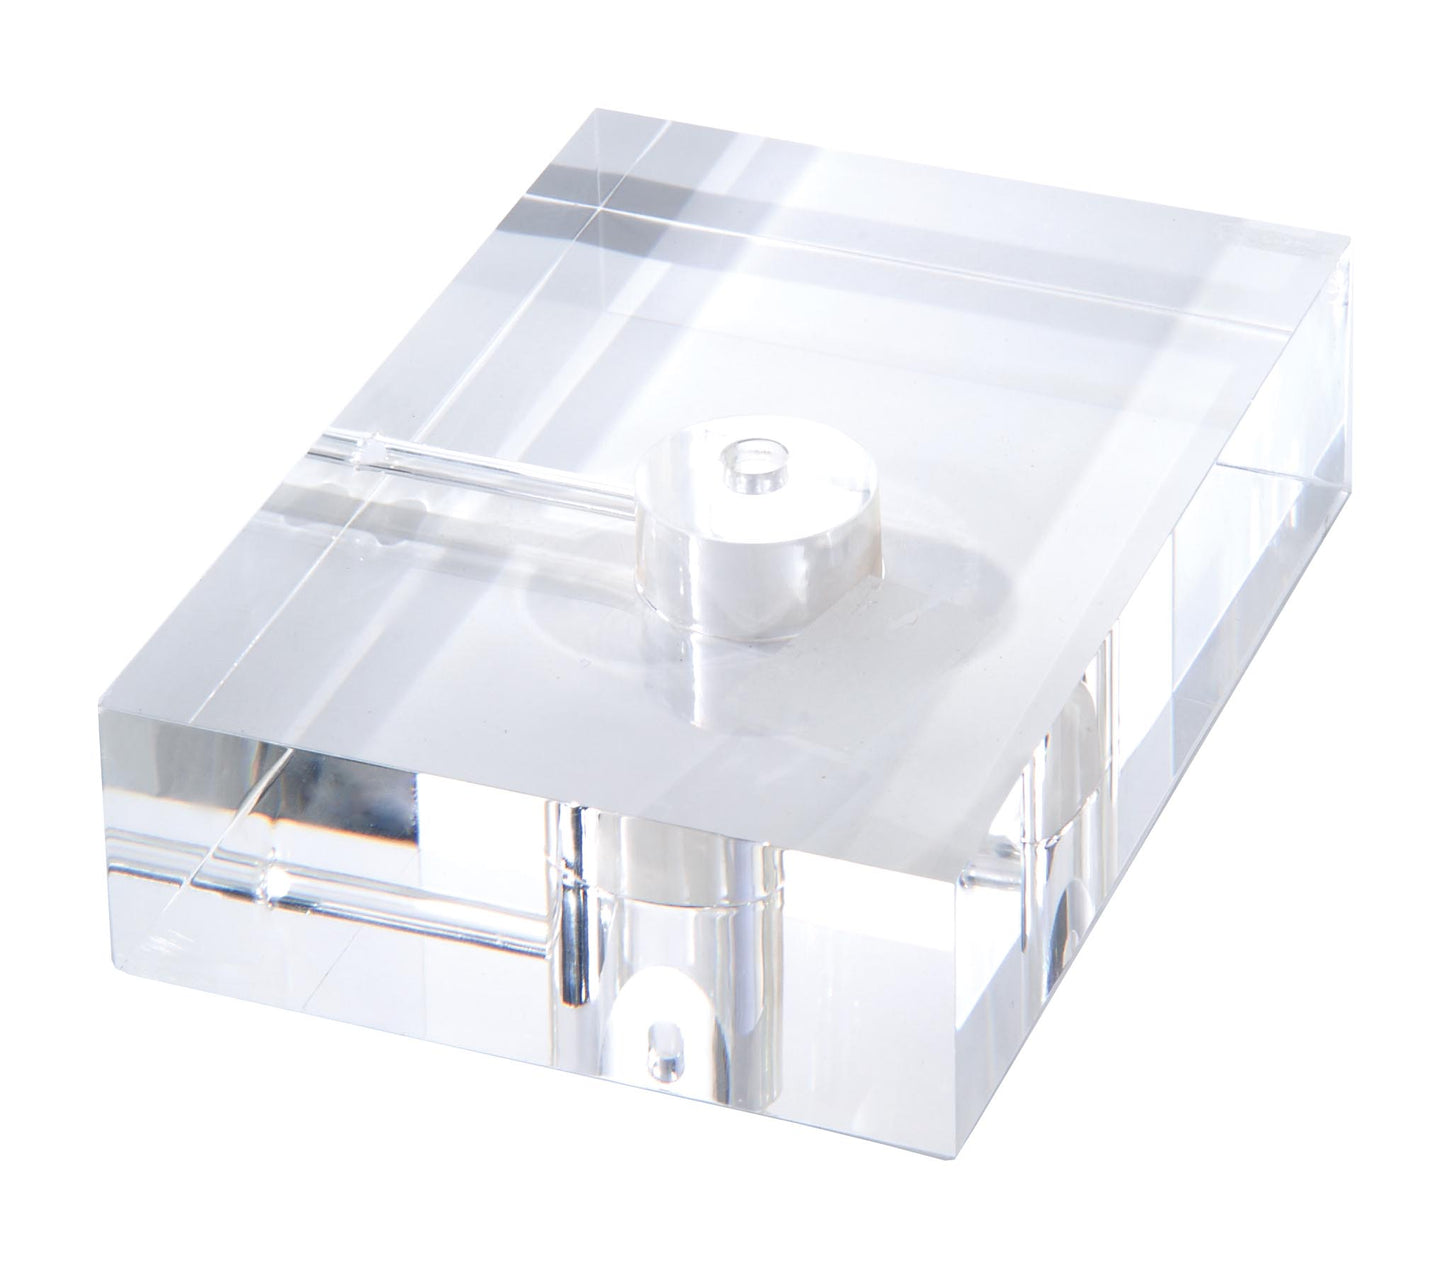 2" Thick, Rectangular, Clear Acrylic Lamp Bases - Choice of 2 Sizes